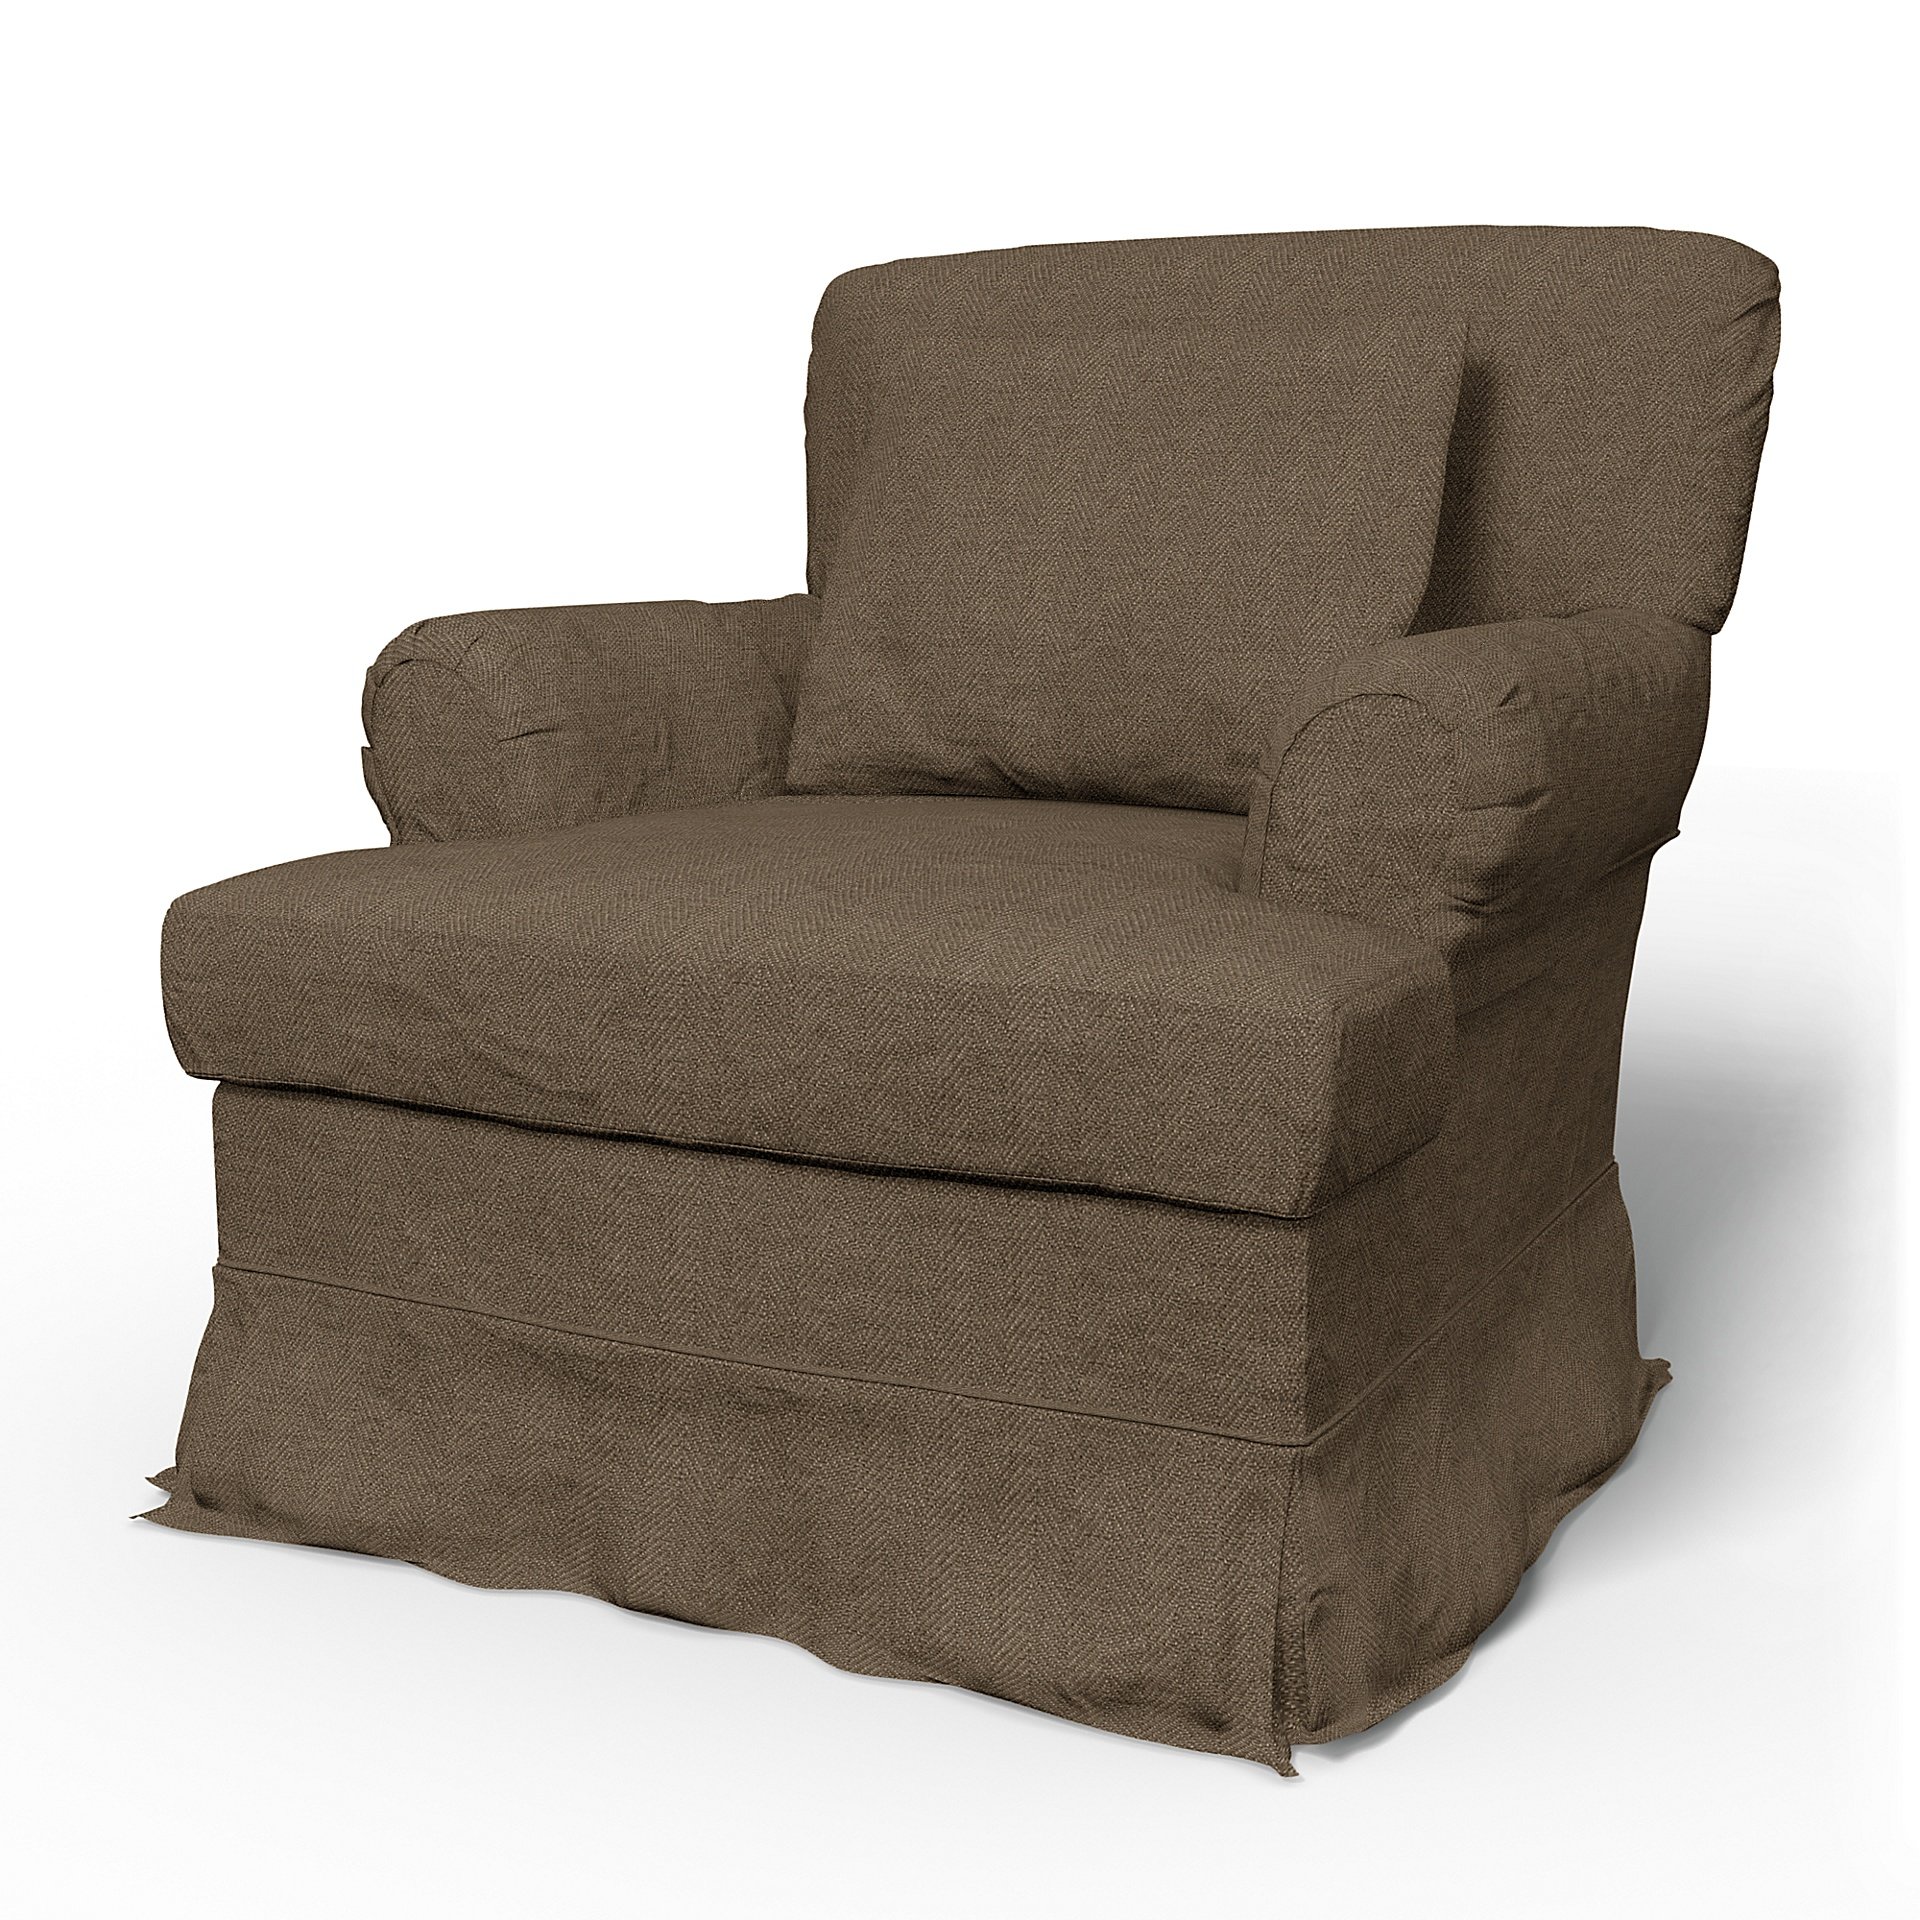 IKEA - Stockholm Armchair Cover (1994-2000), Dark Taupe, Boucle & Texture - Bemz